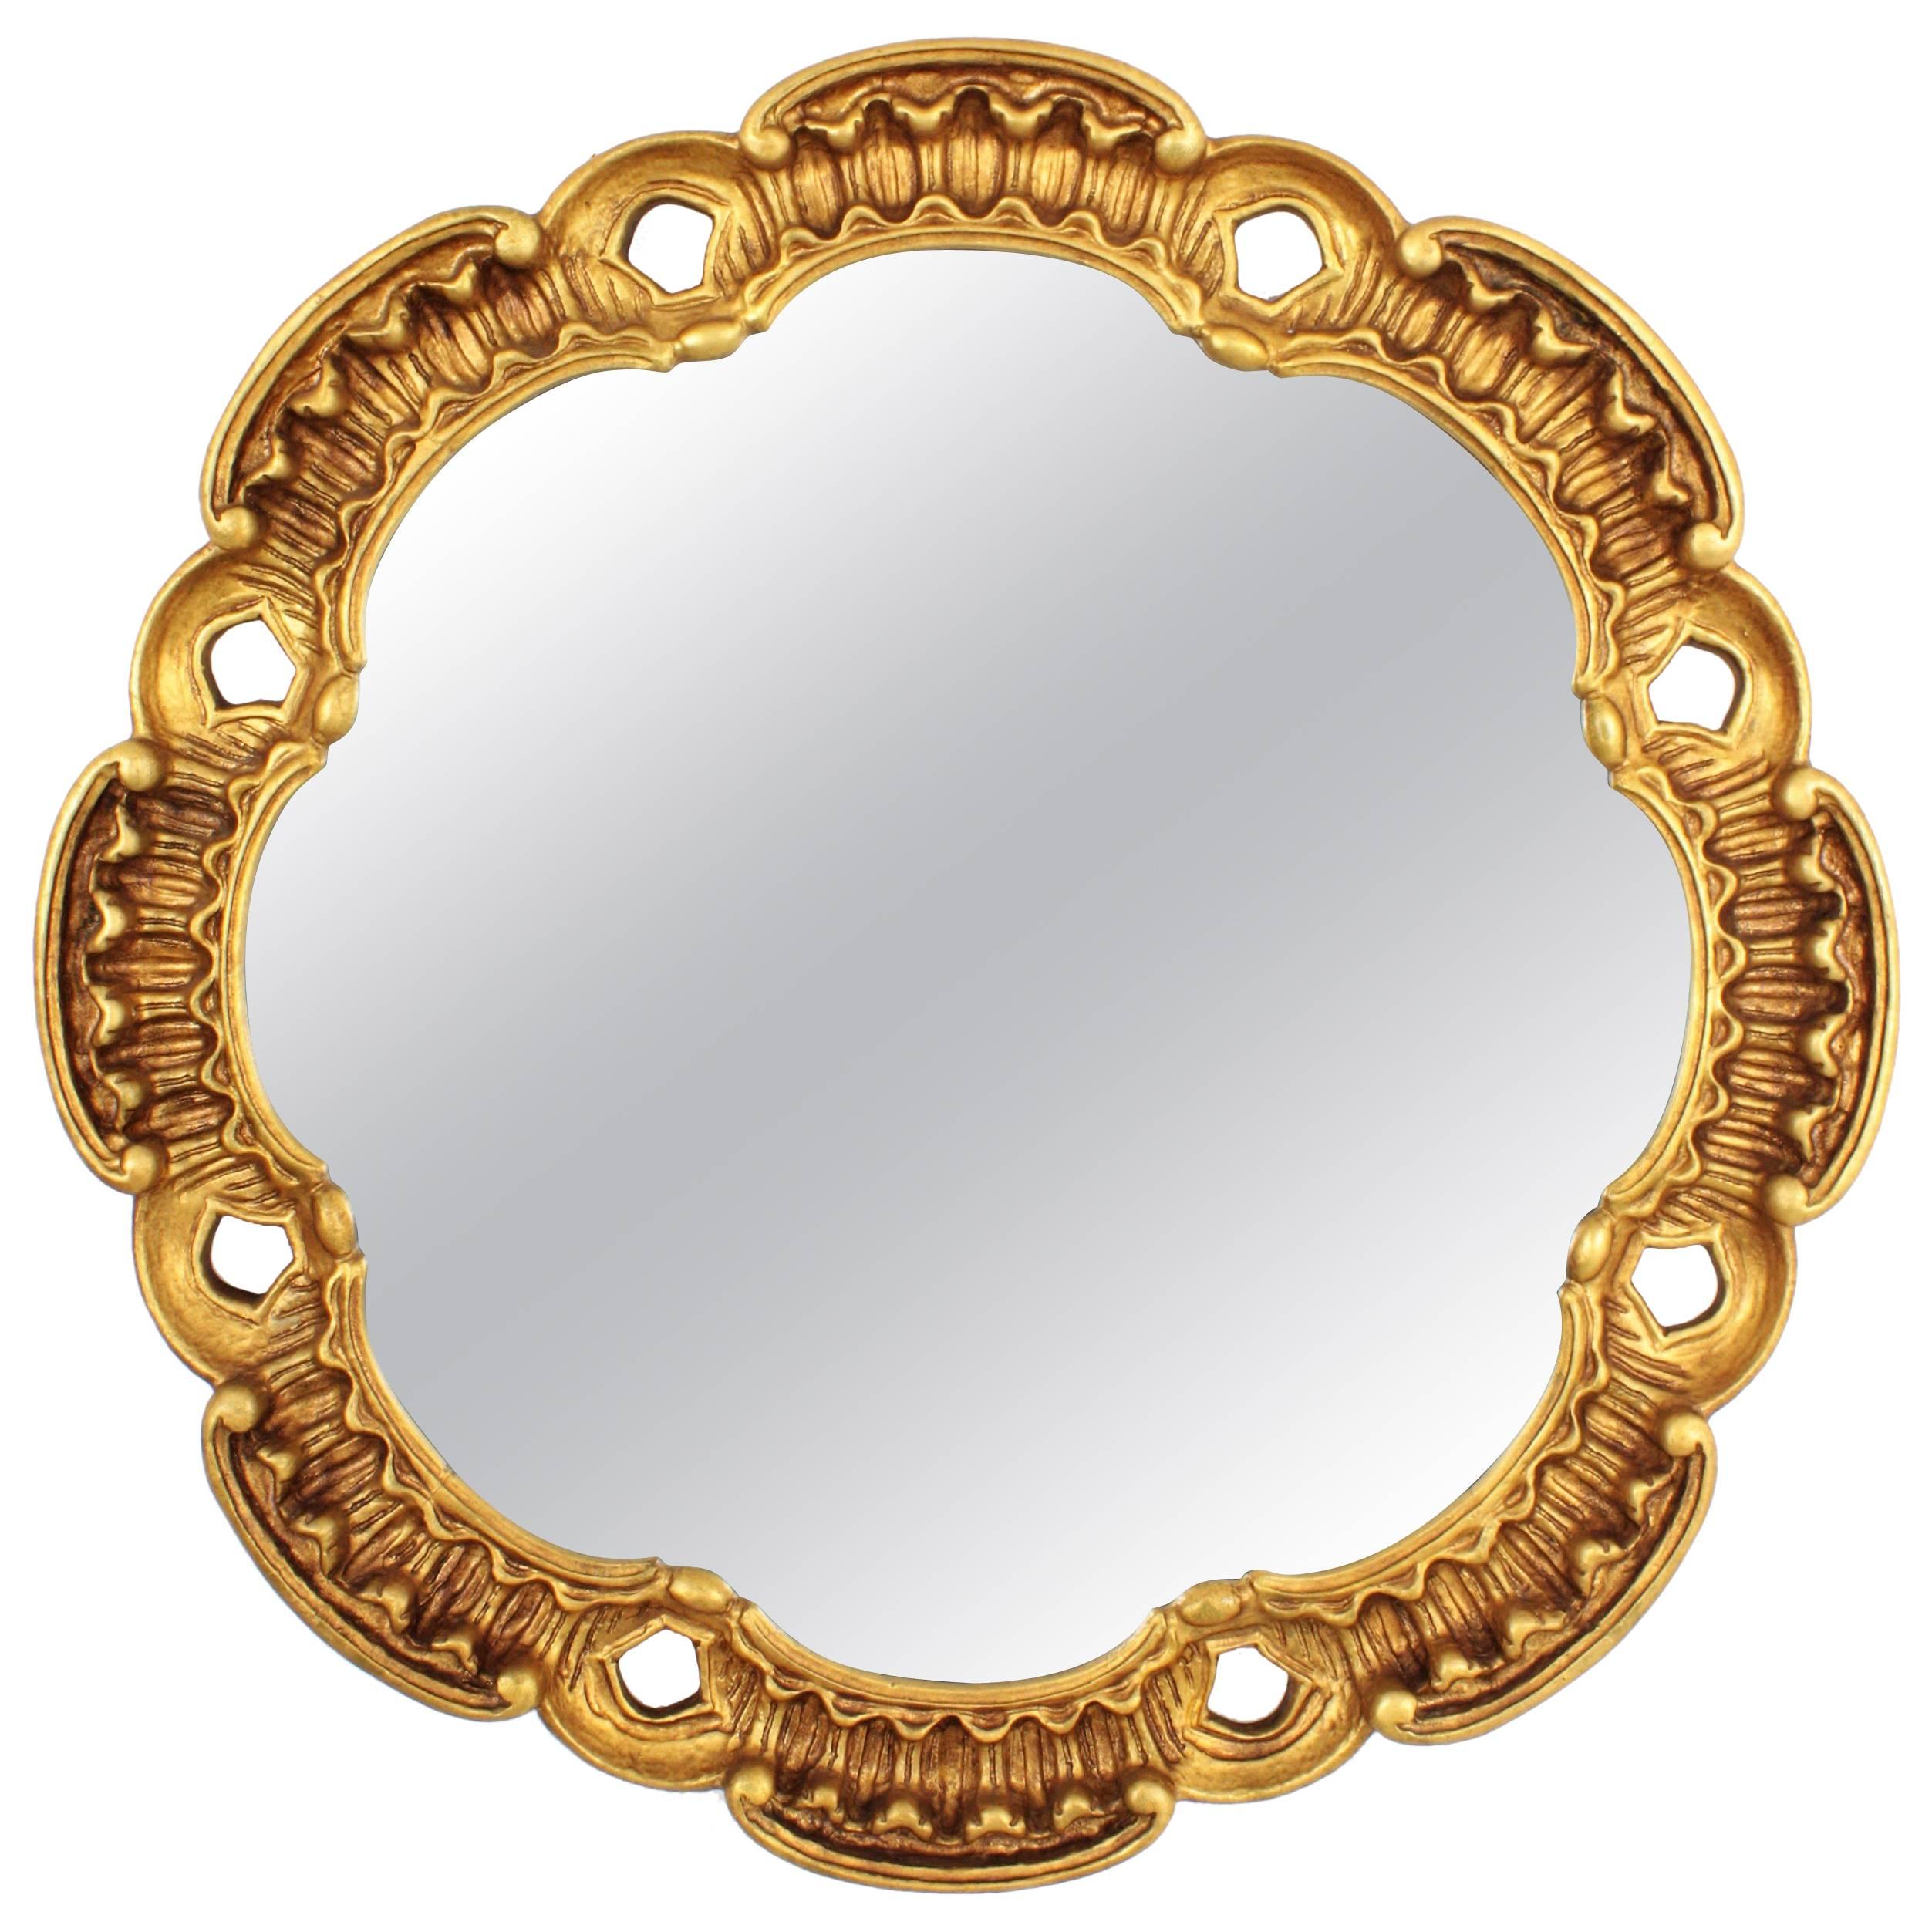 Francisco Hurtado Scalloped Giltwood Mirror with Carved Scroll-Work, Spain 1960s